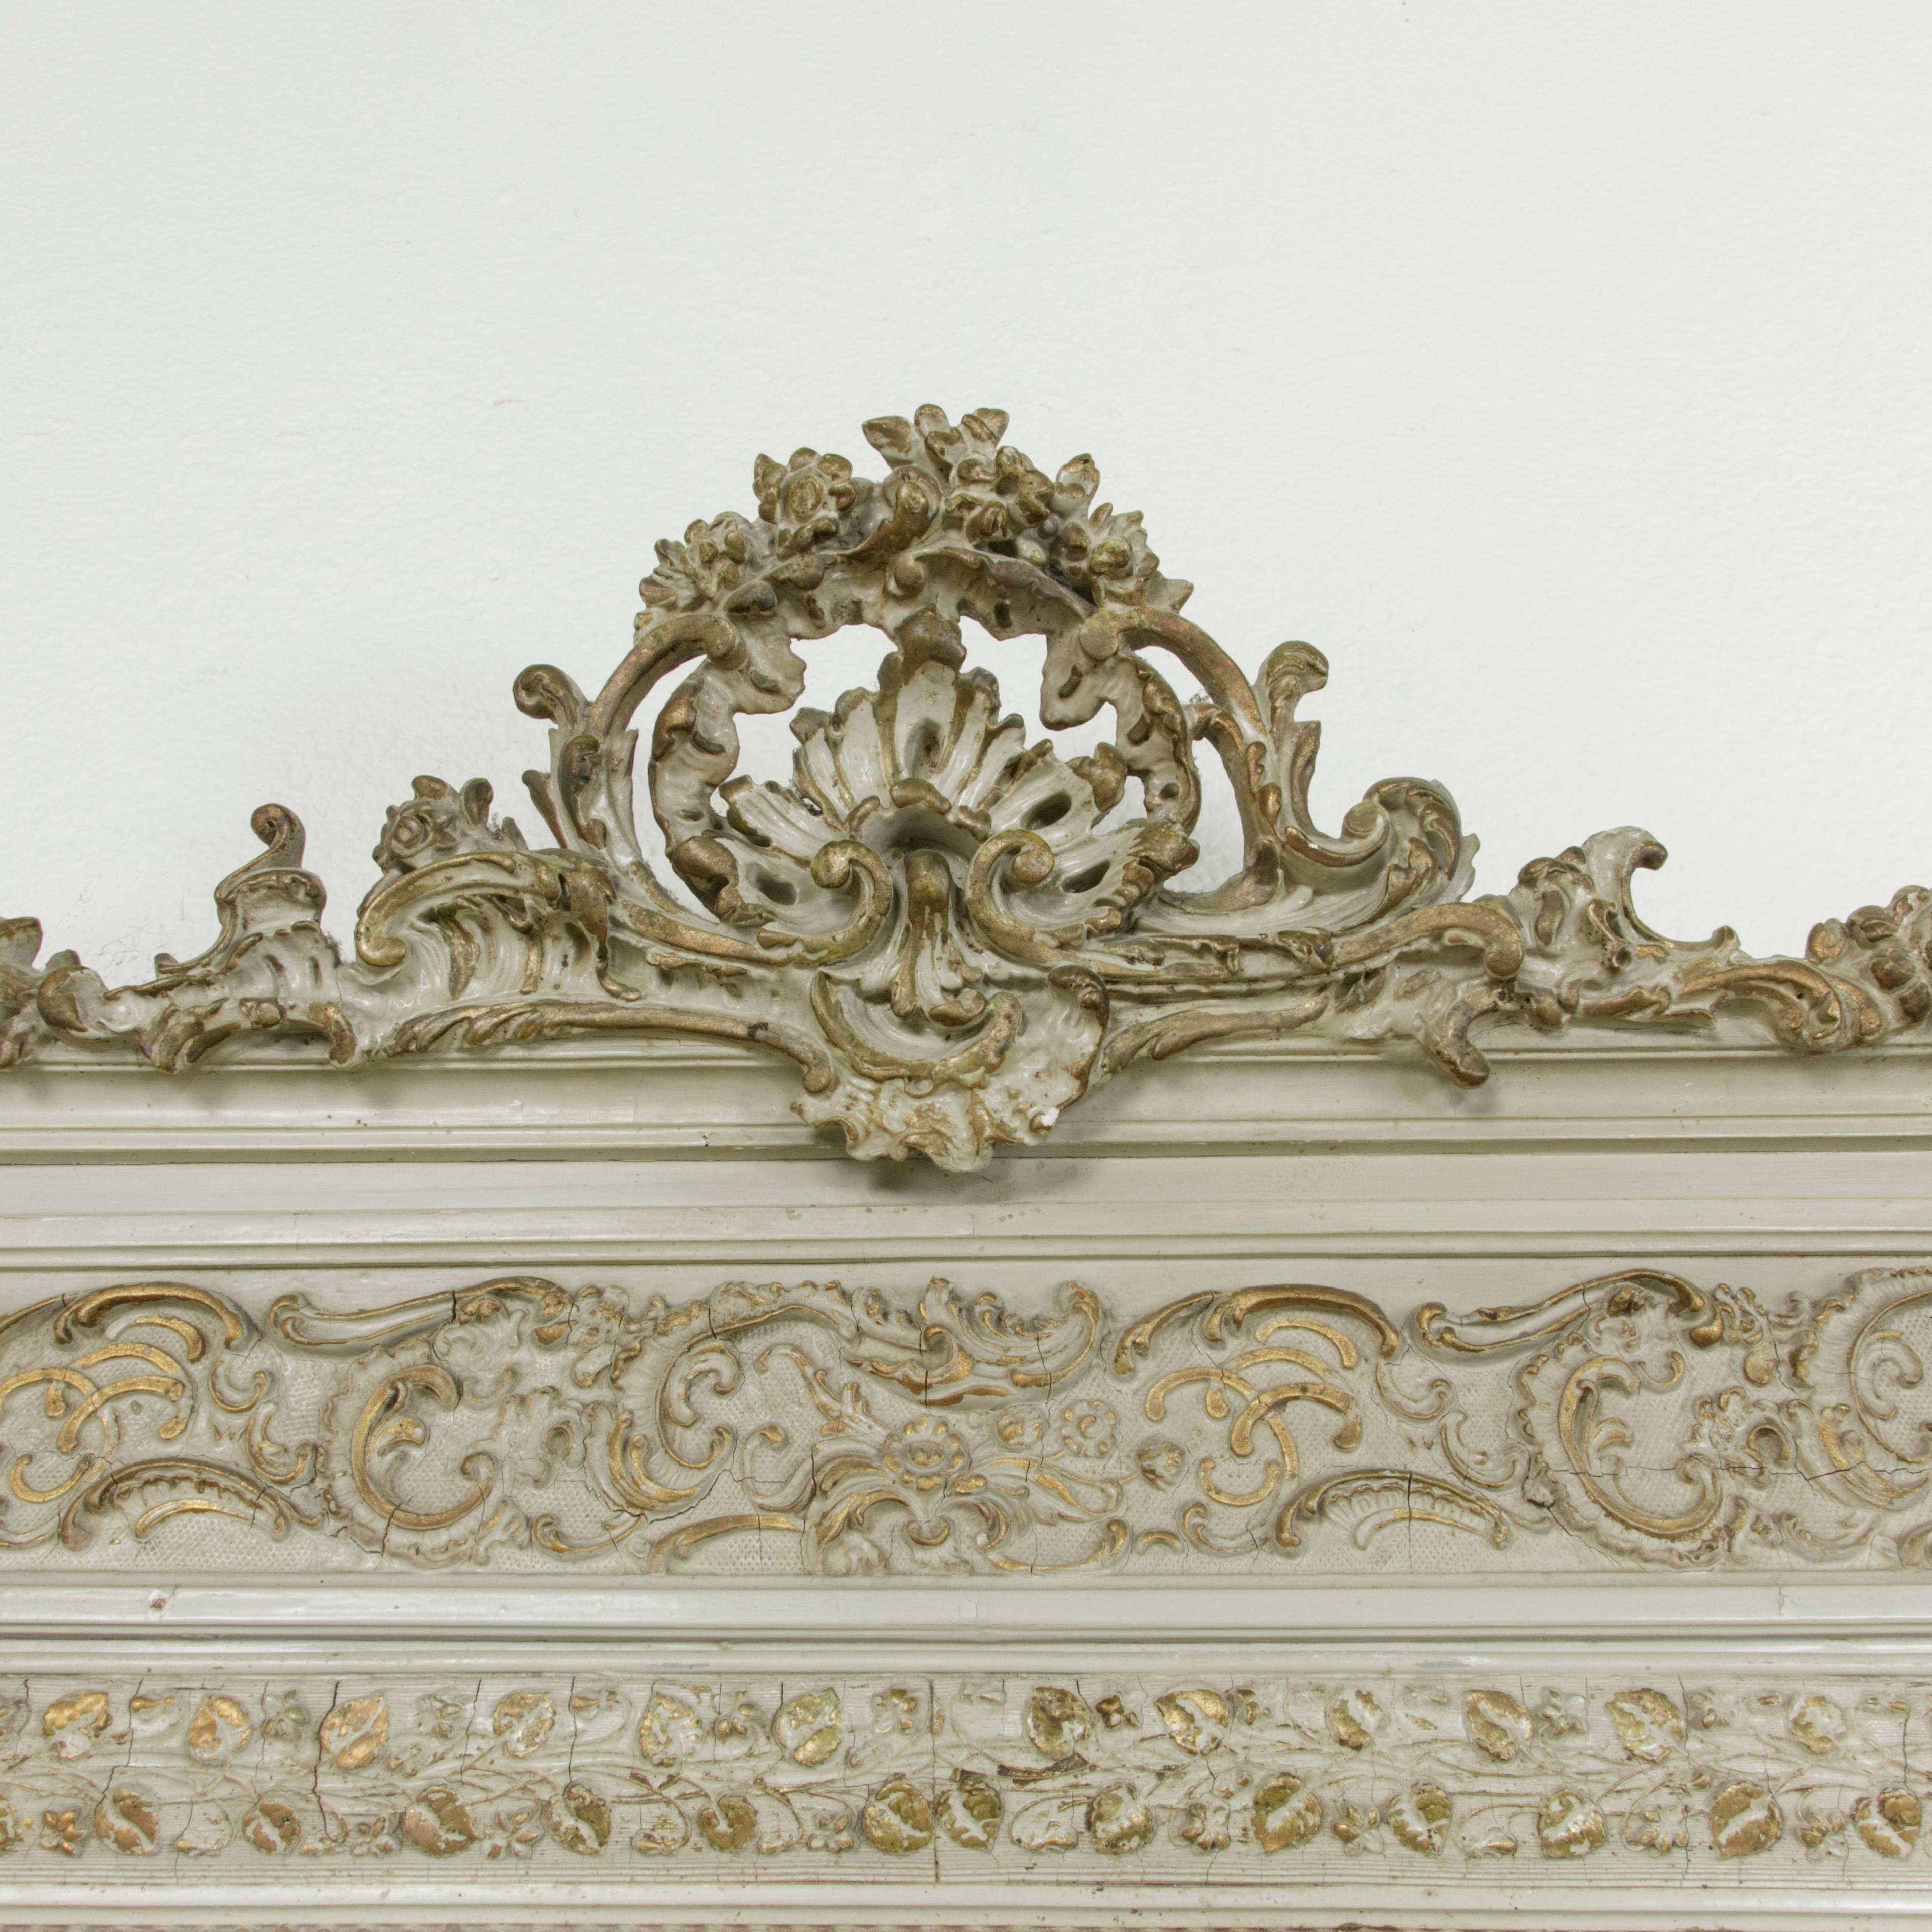 Originally hung above a fireplace mantle, this mid-19th century Napoleon III period painted mirror features hand carving of Louis XV inspired motifs that include a scalloped shell and flourish at the top and scrolling, beading, and florets around